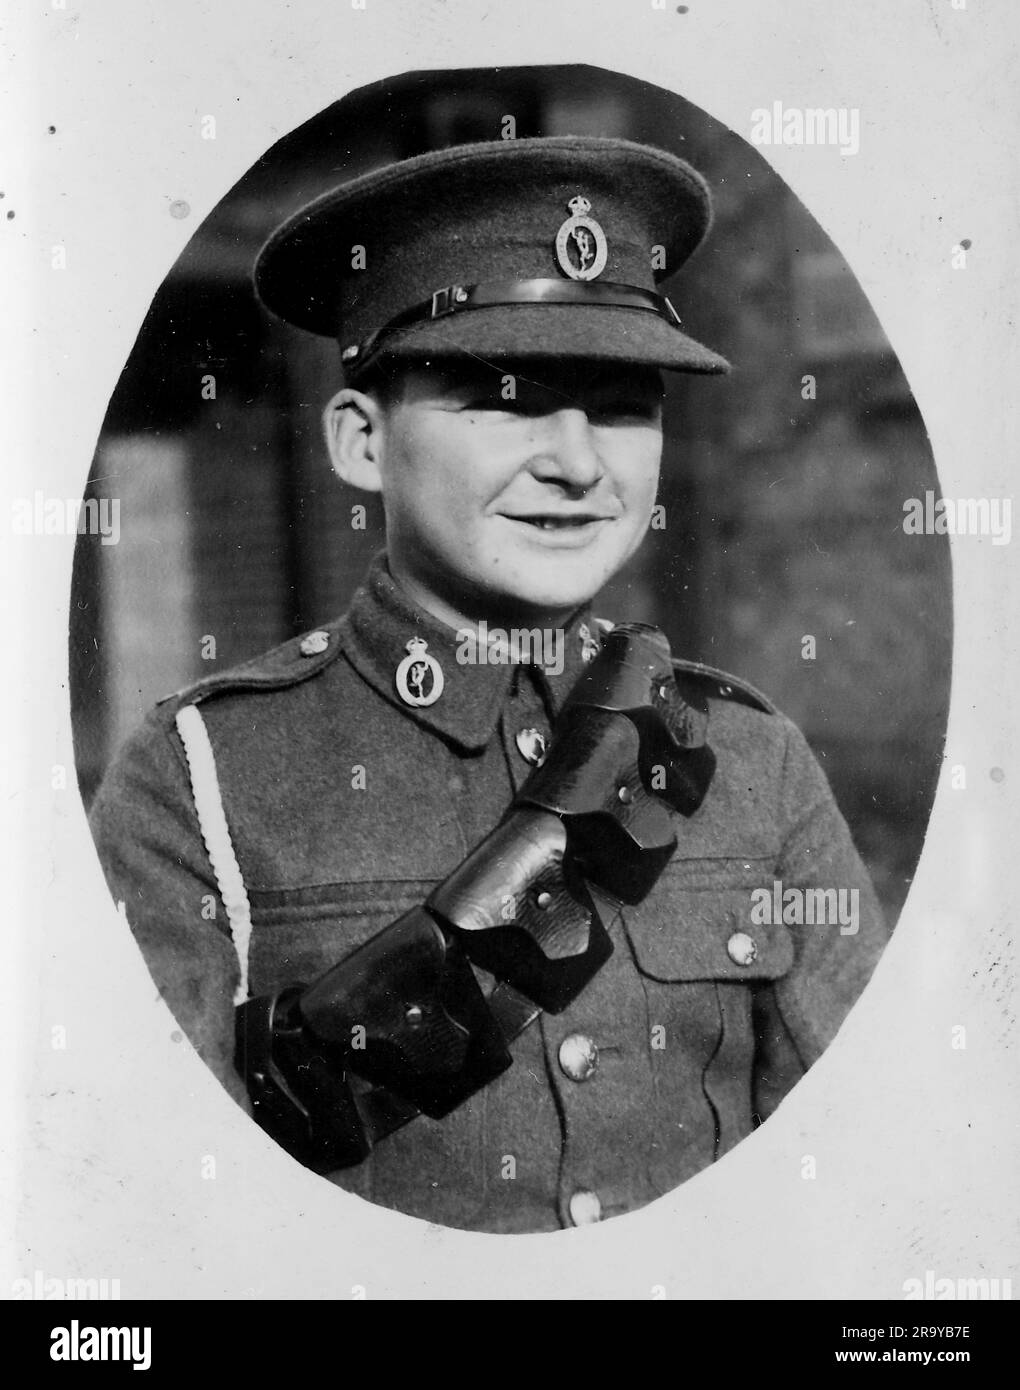 Head and shoulder portrait of a British soldier in uniform, probably from the first world war period. This is a photograph from an album of mainly snapshots. Stock Photo